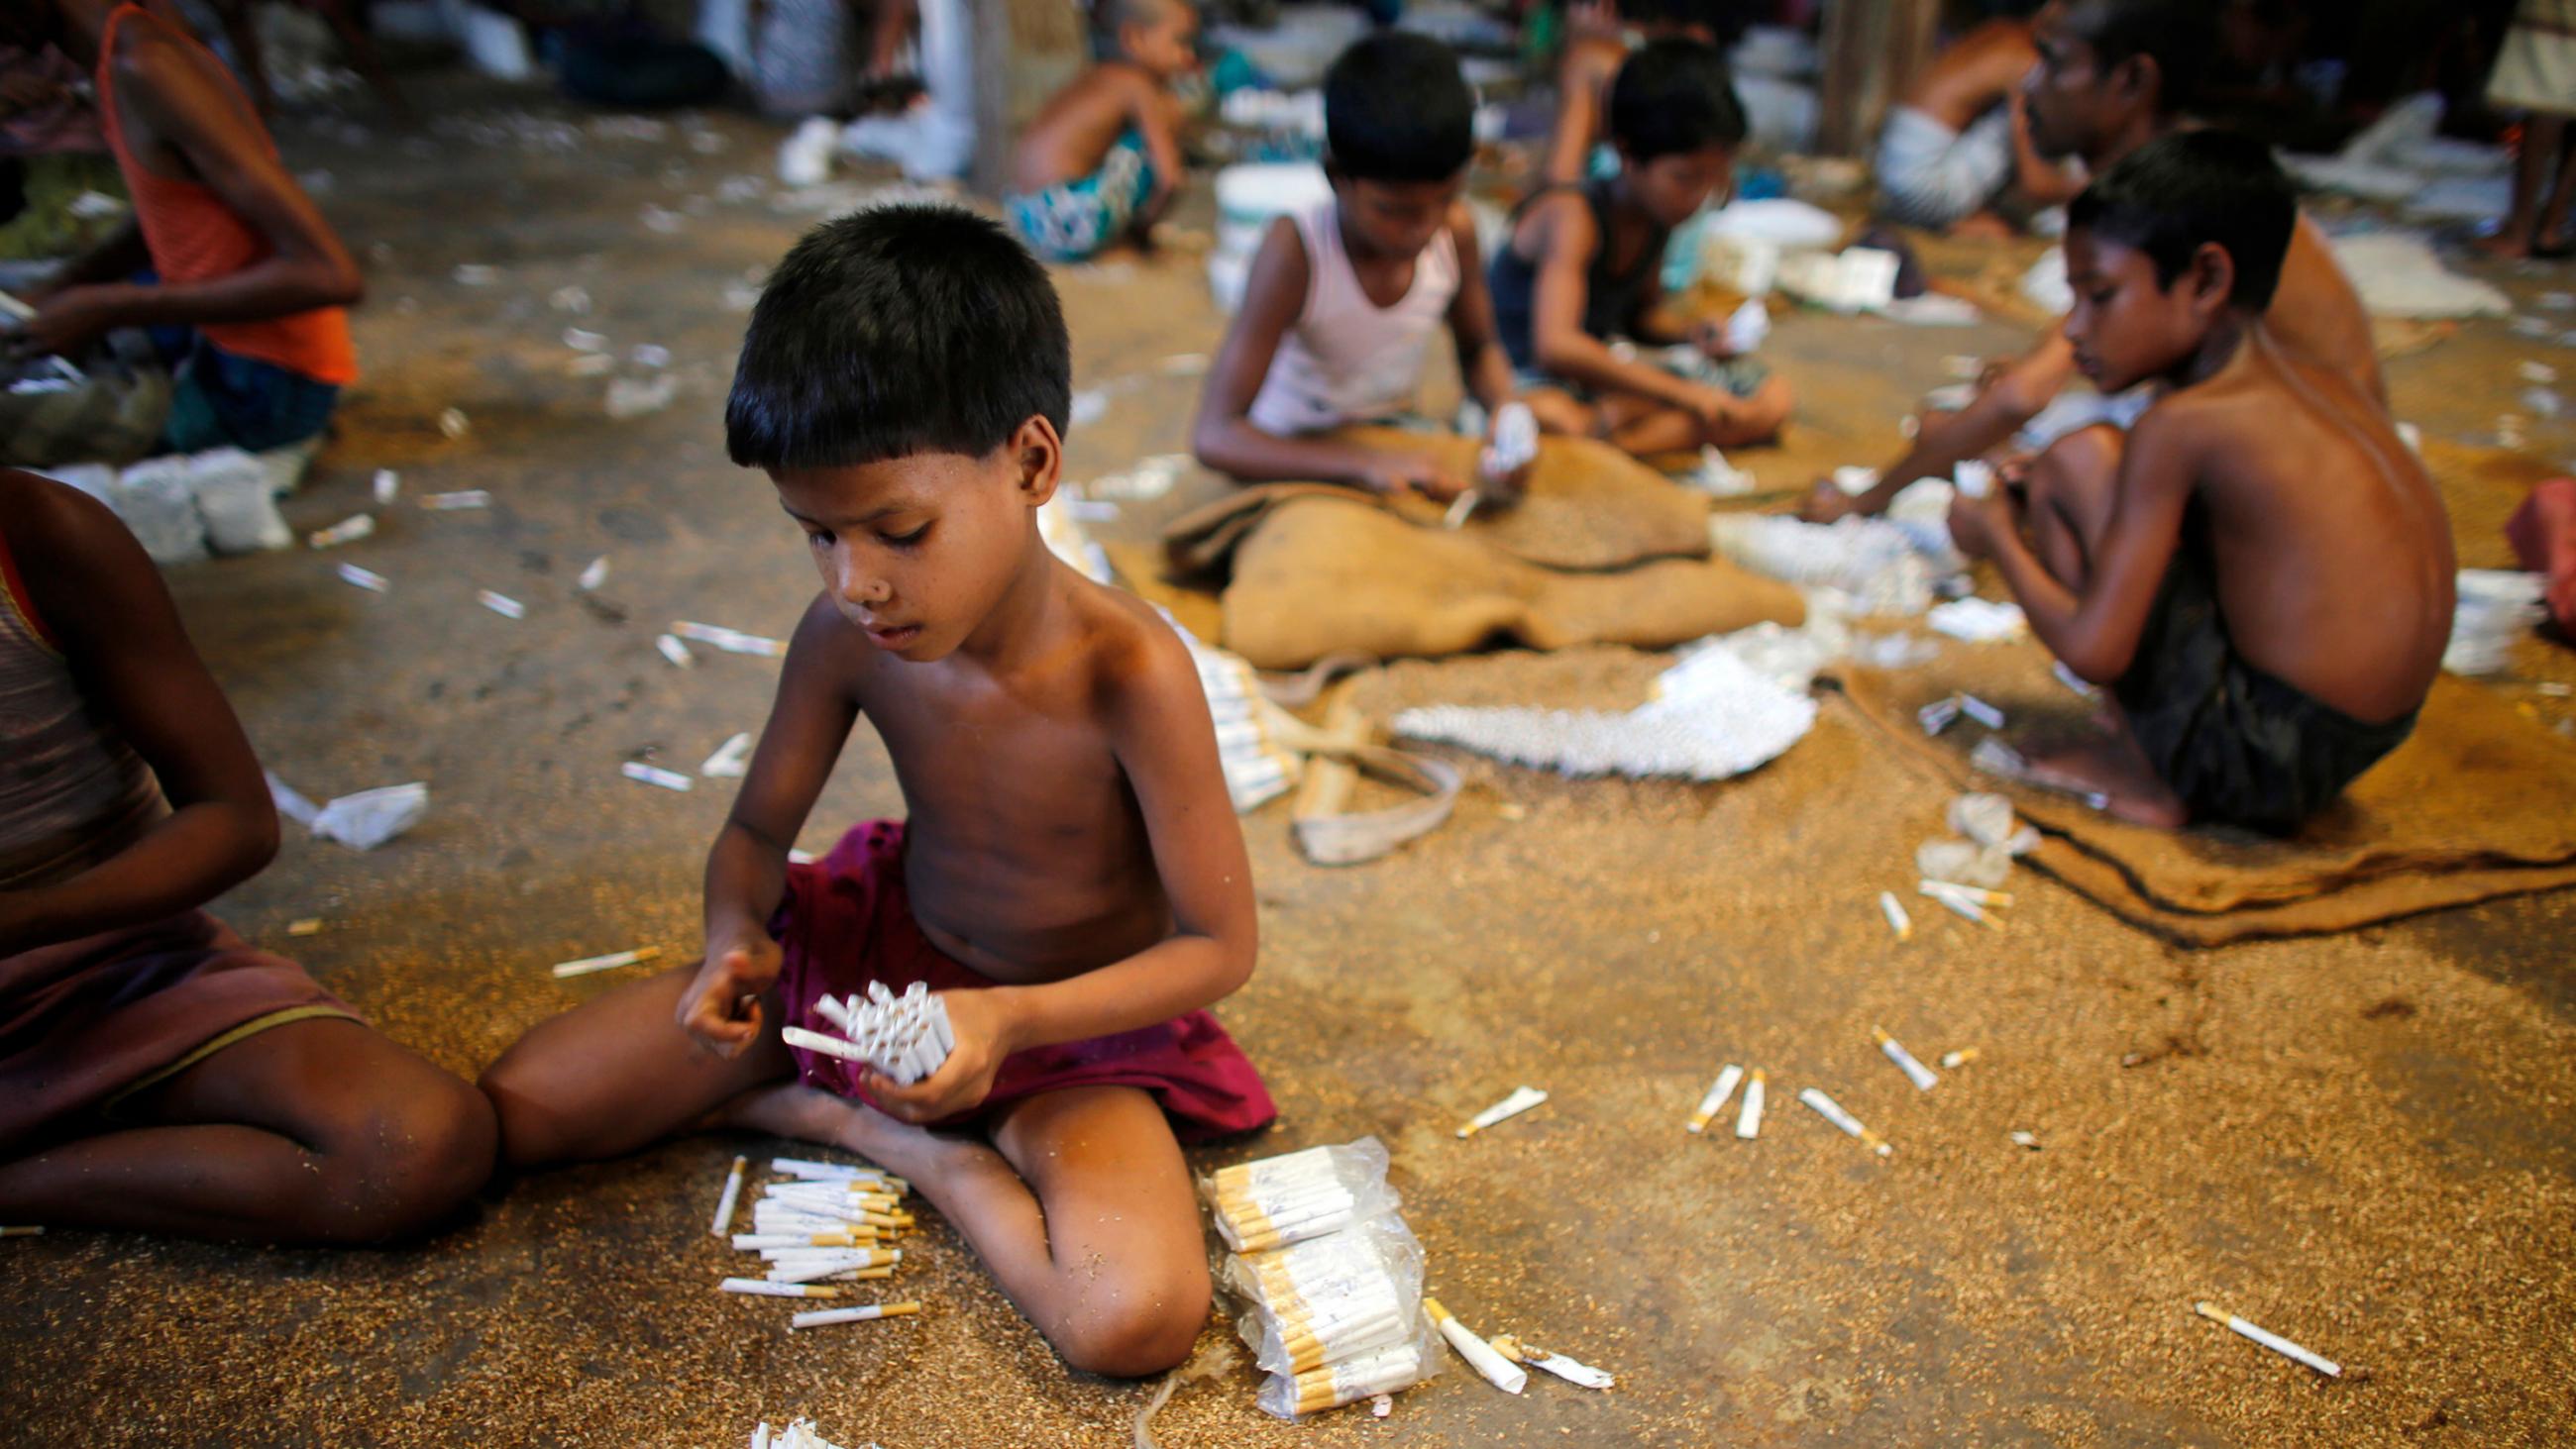 Picture shows several small children sitting around sorting piles of cigarettes. 